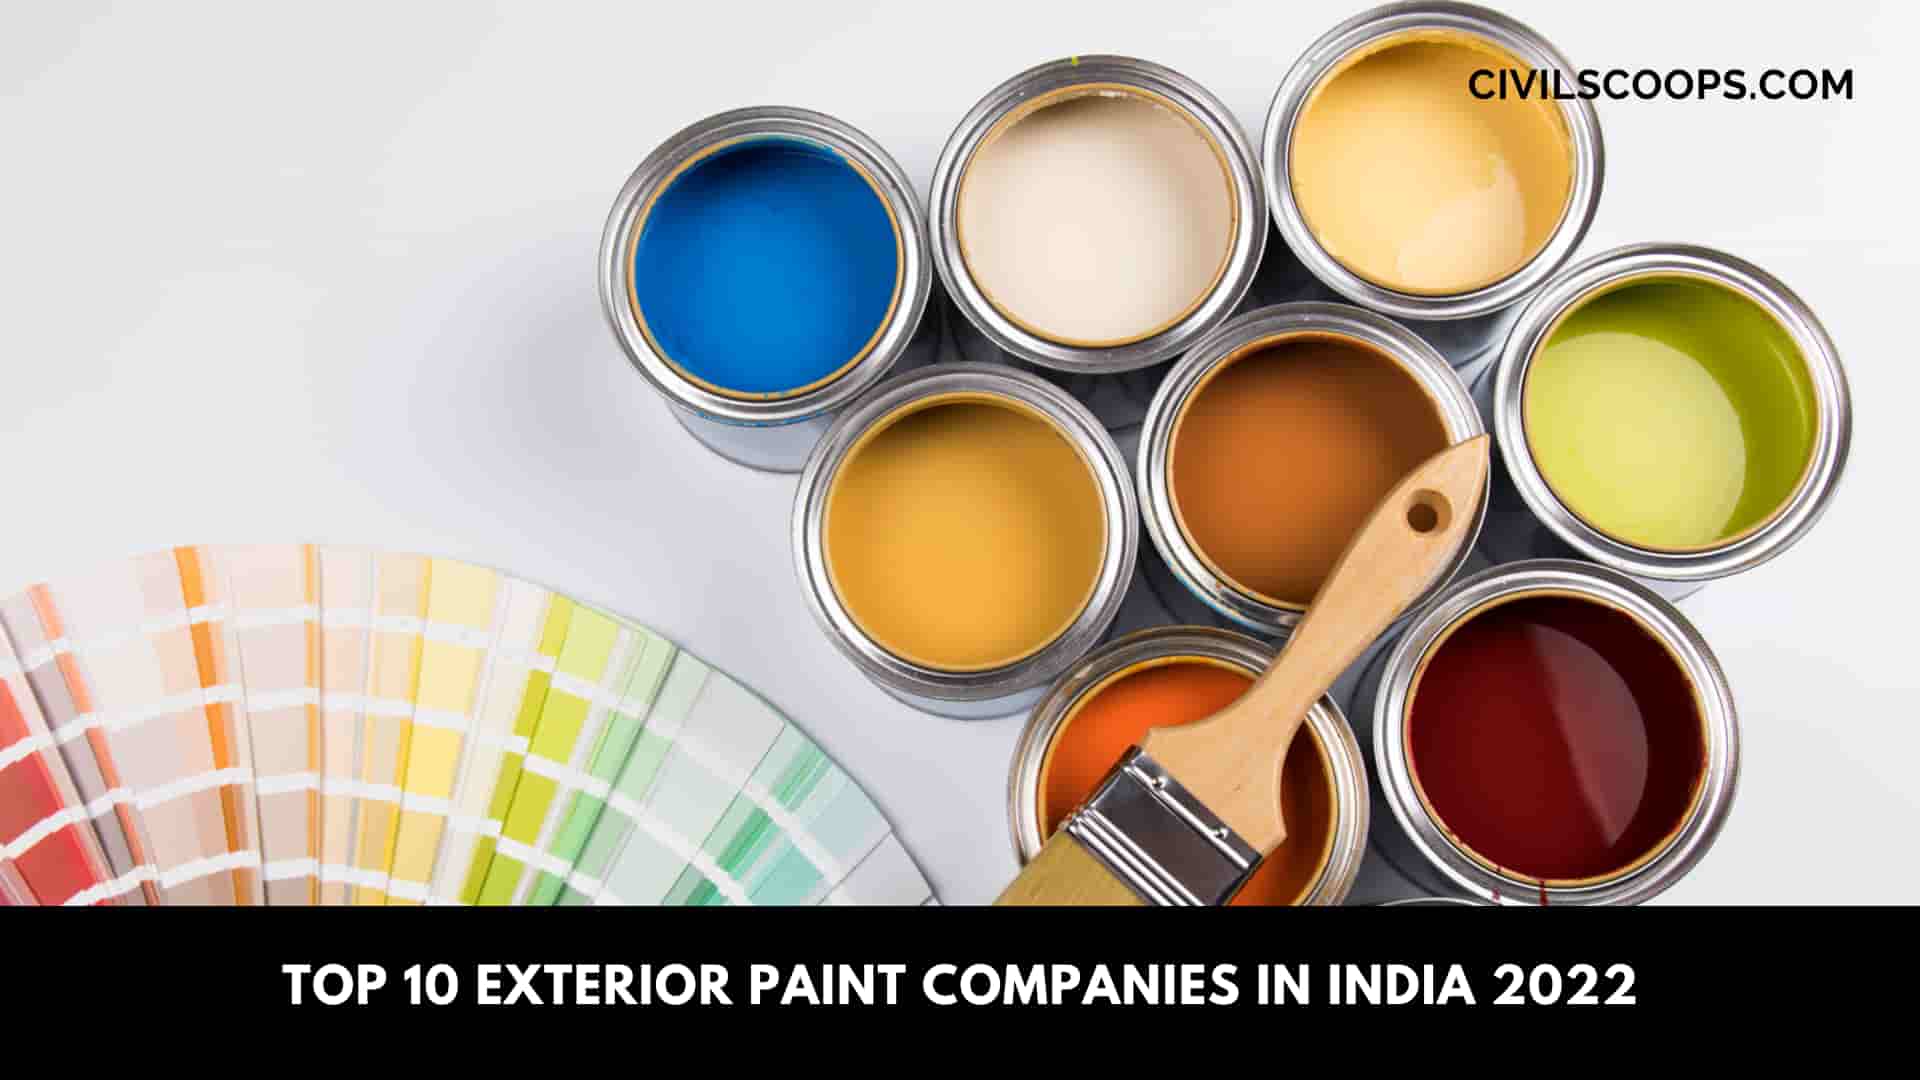 Top 10 Exterior Paint Companies in India 2022